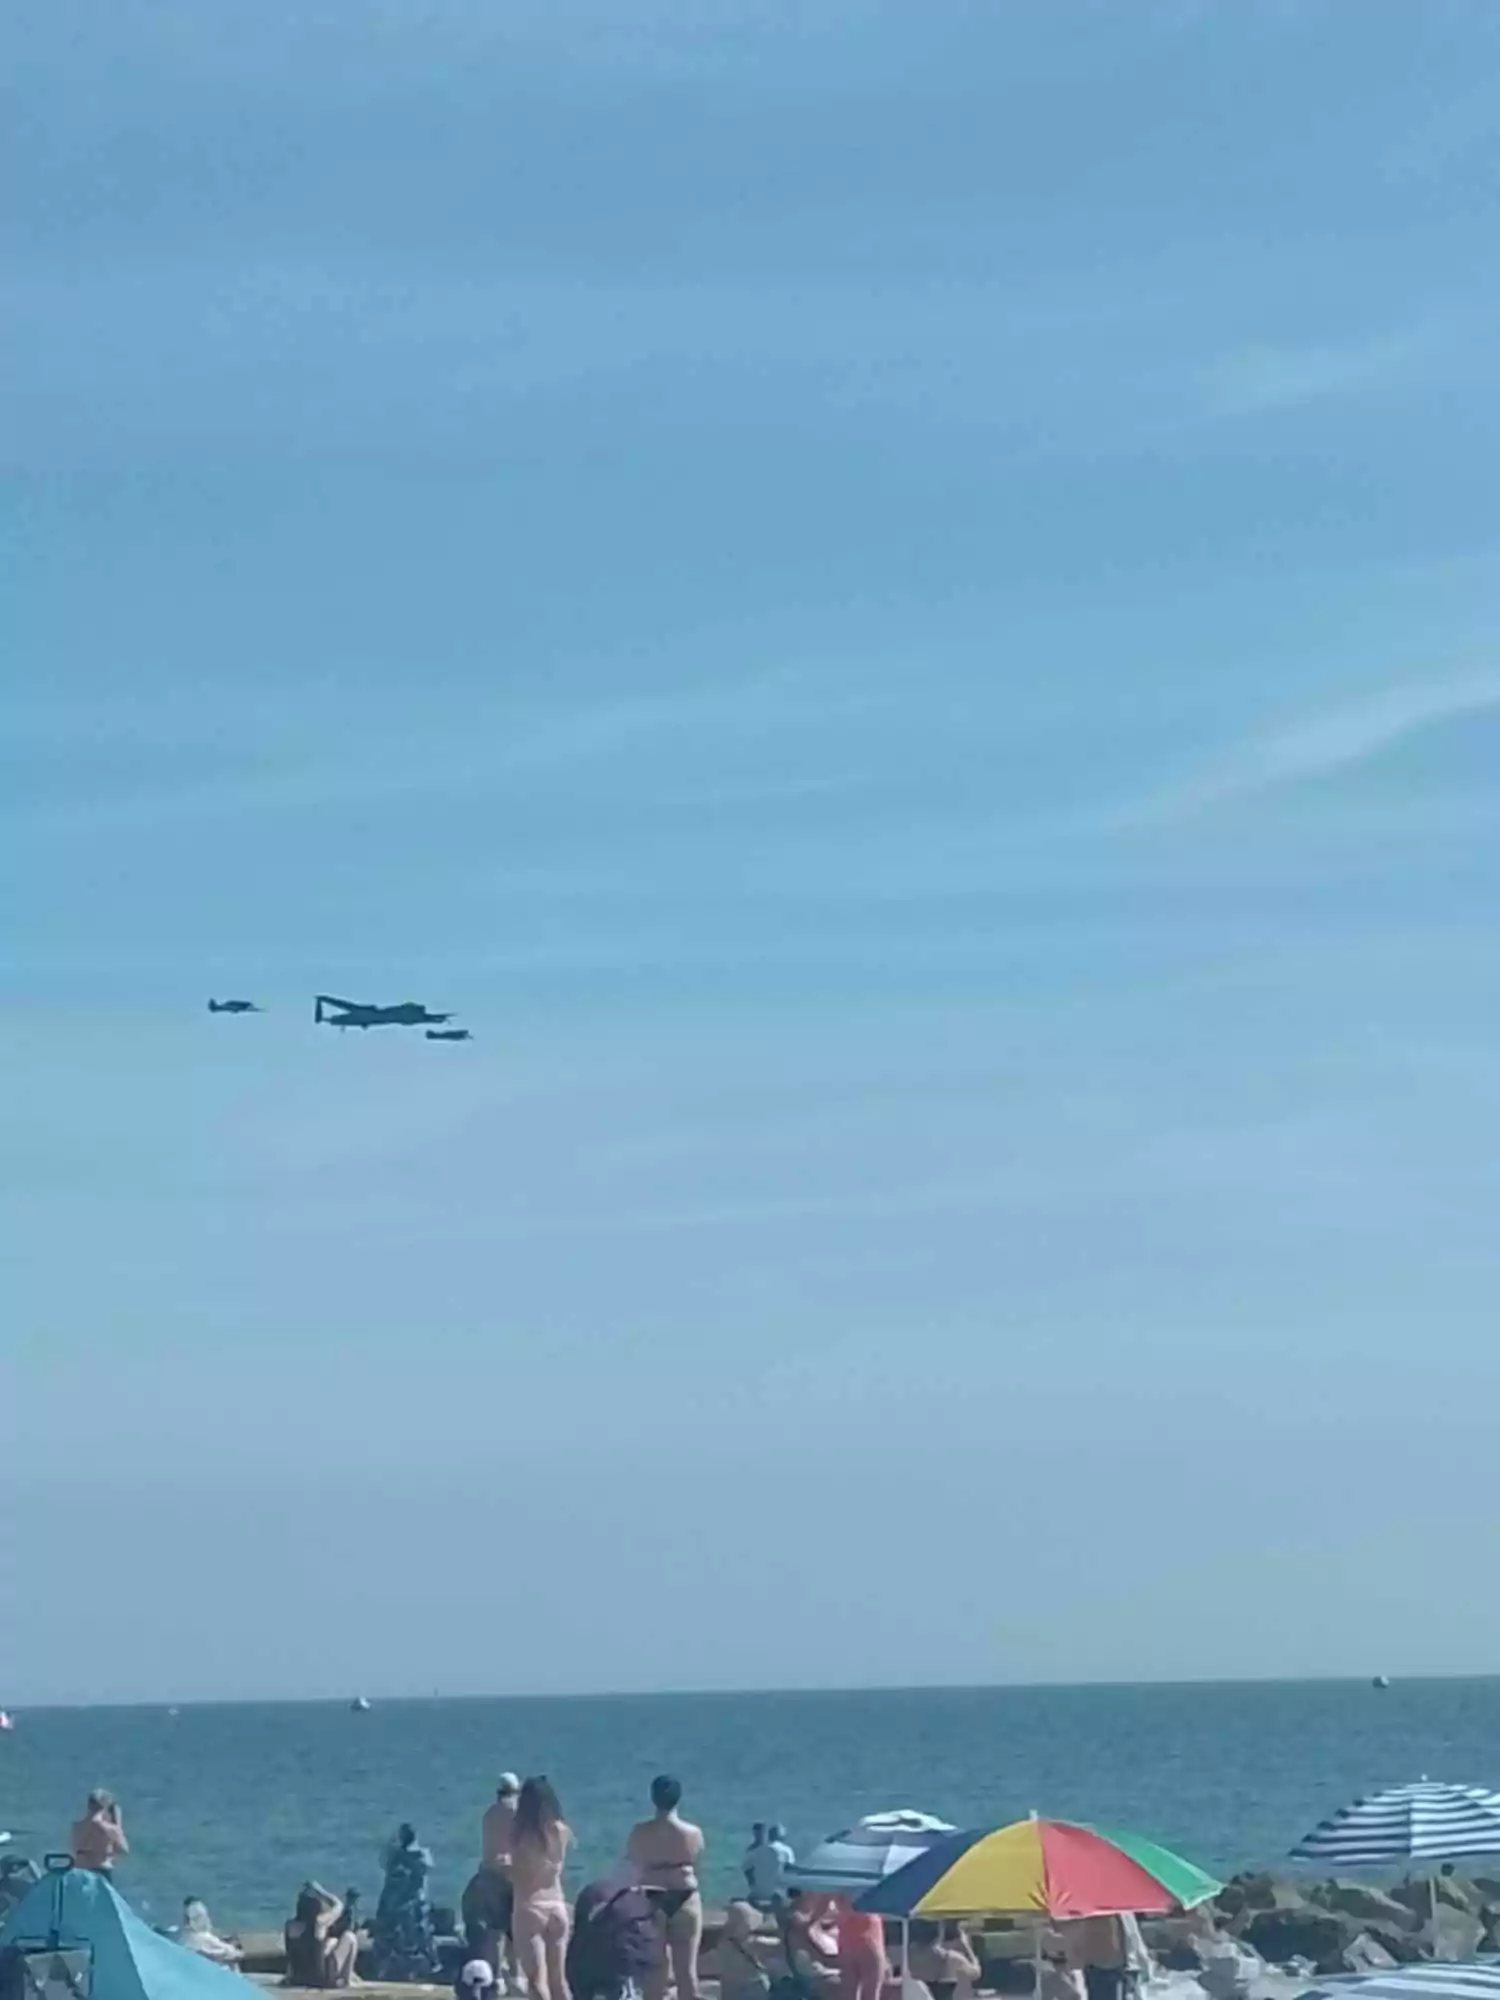 The RAF Battle of Britain Memorial flight flying at the air show